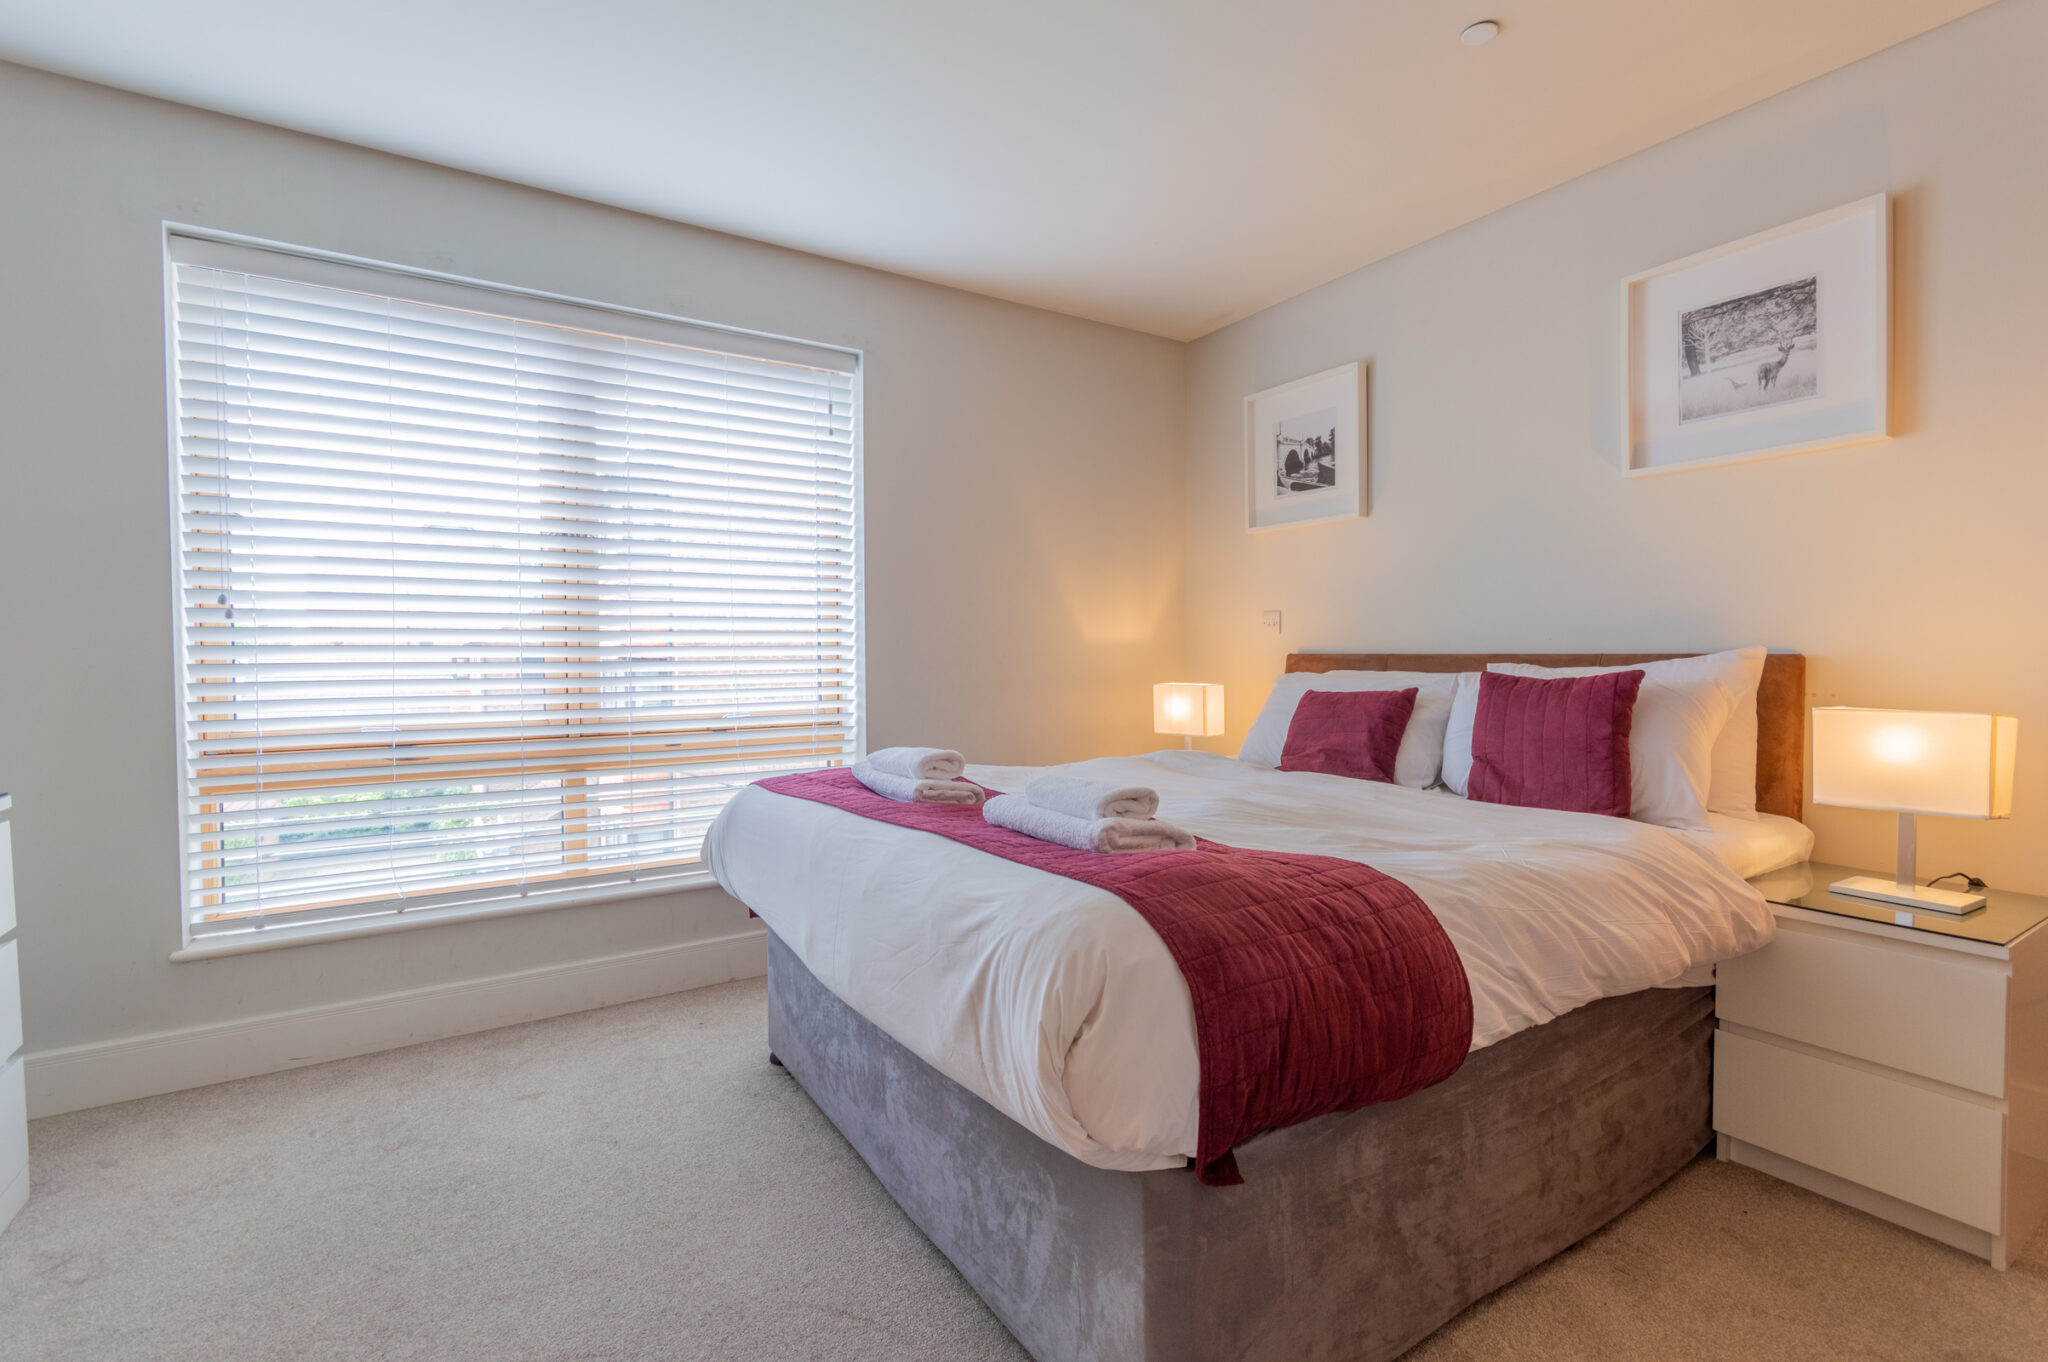 Discover exceptional accommodation in Kingston Upon Thames at Marina by Urban Stay. Explore our special amenities including modern furnishings, convenient location, and top-notch services. Experience comfort and convenience during your stay. Book now!